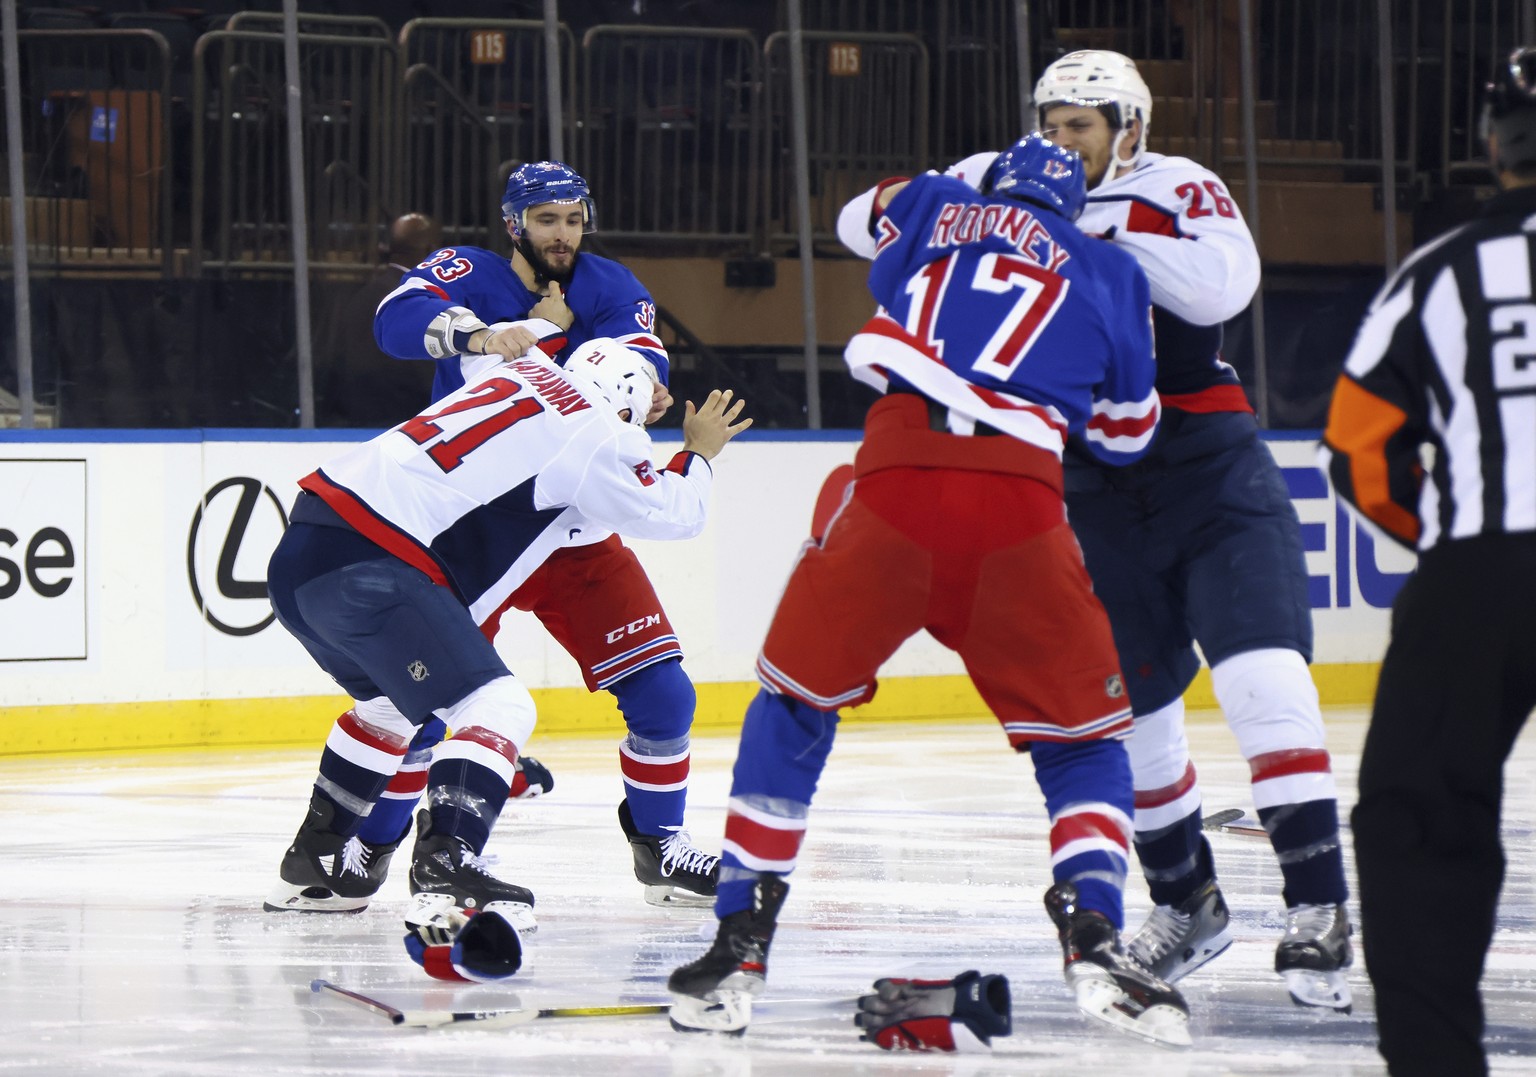 Washington Capitals and New York Rangers fight in the opening seconds of an NHL hockey game Wednesday, May 5, 2021, in New York. (Bruce Bennett/Pool Photo via AP)